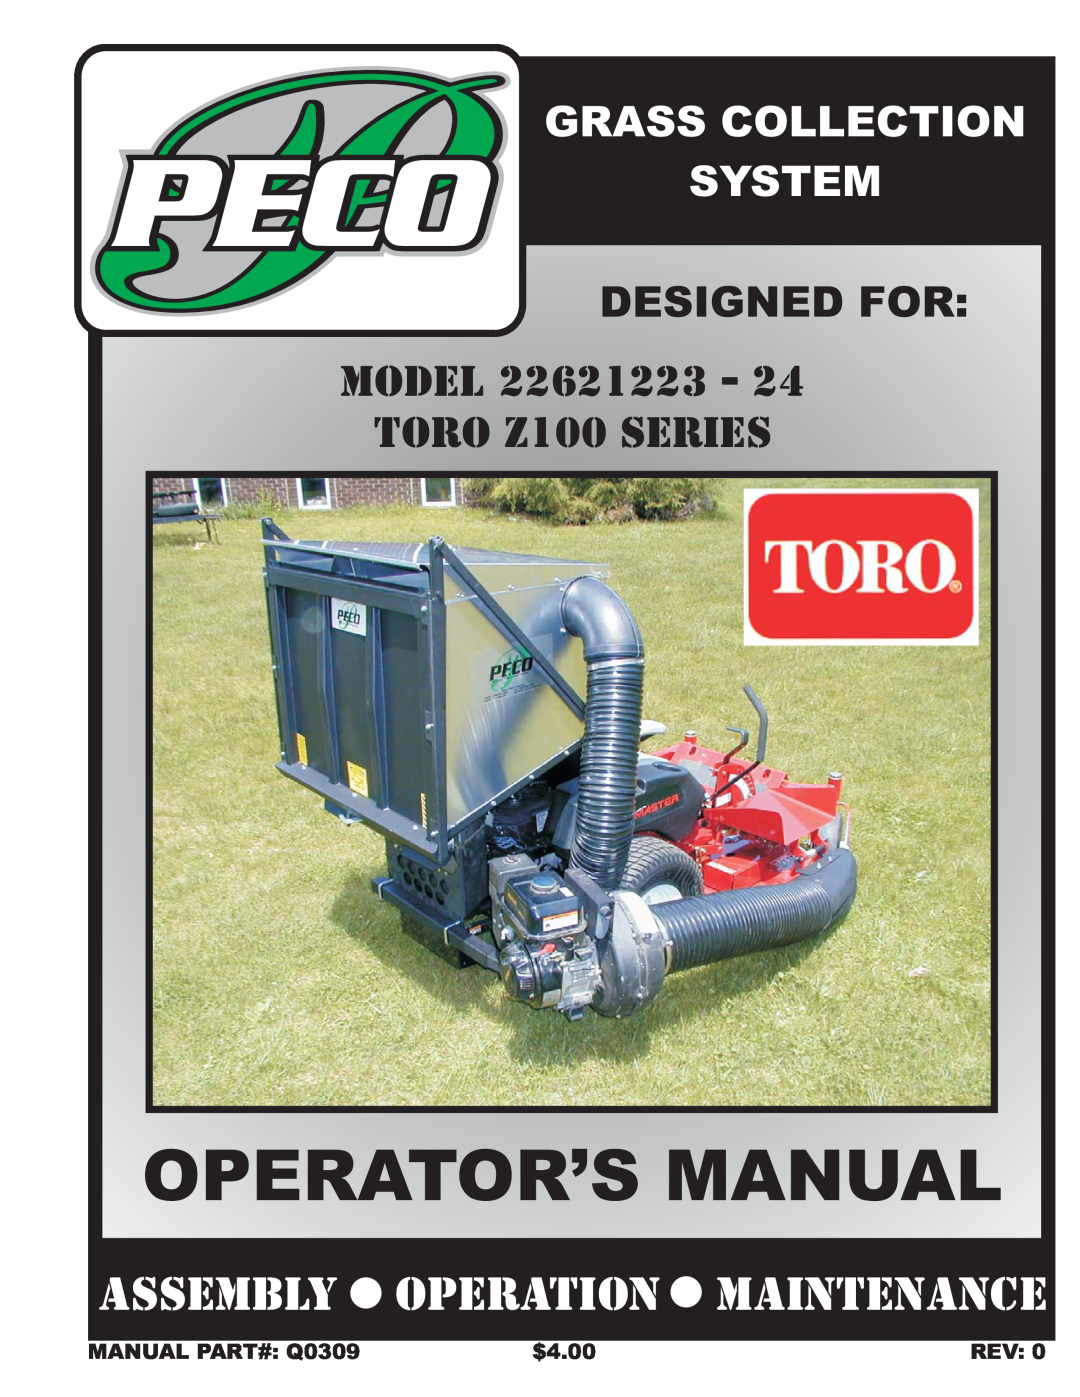 Toro 22621223-24 manual Peco, Operator’S Manual, Assembly Operation Maintenance, Grass Collection, System, Model, $4.00 